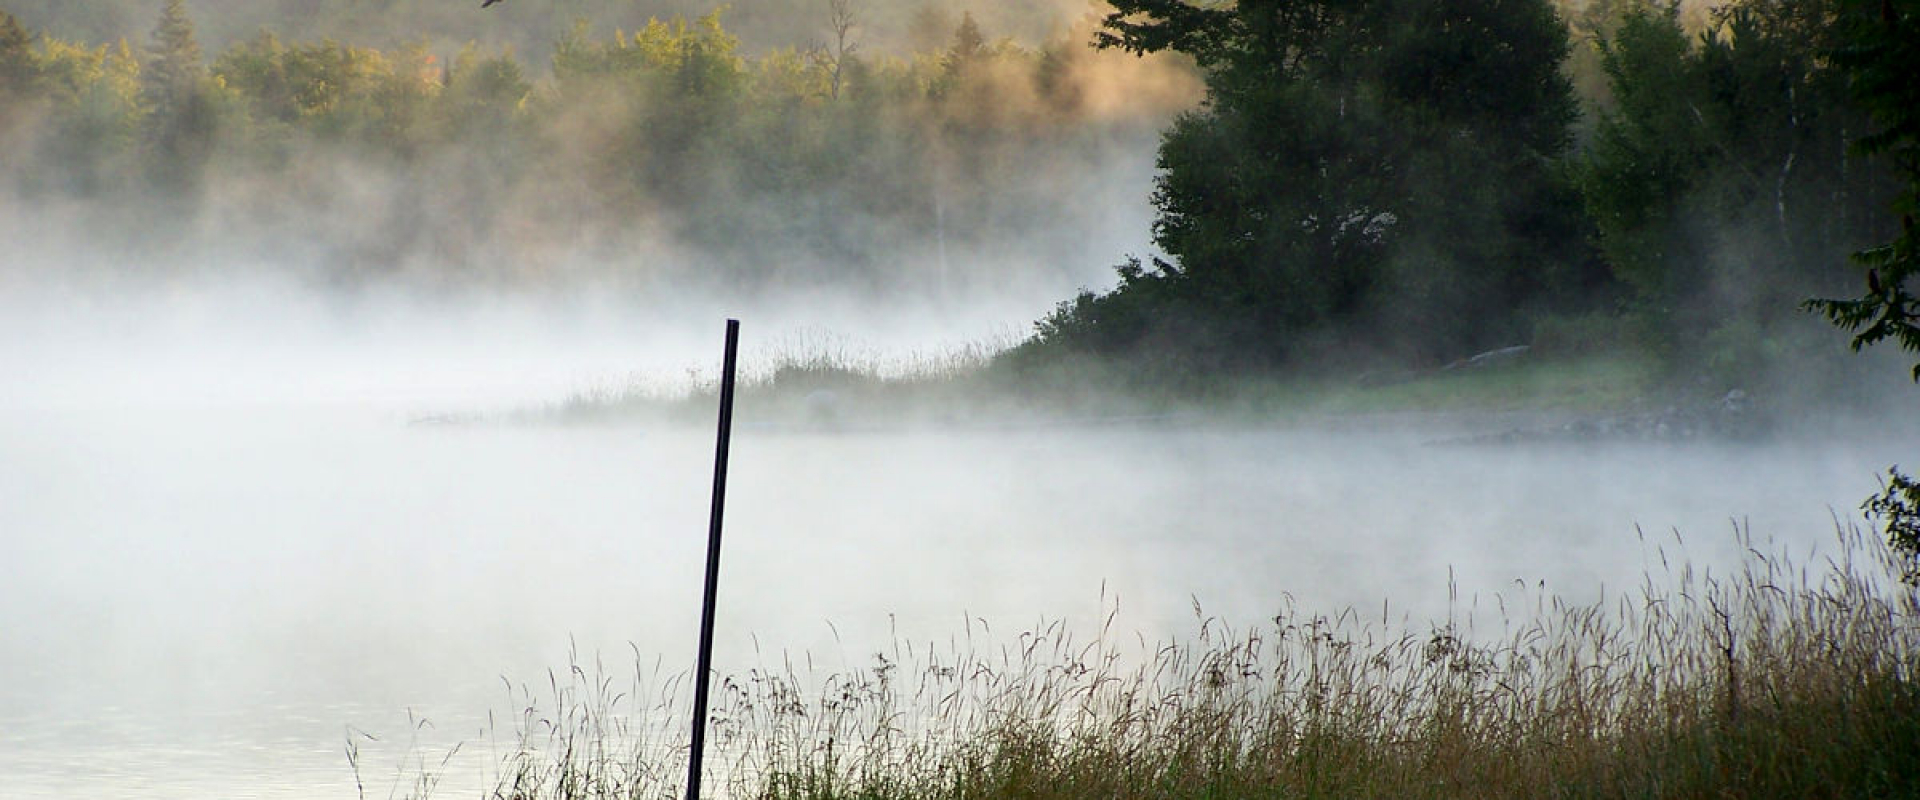 A misty morning on a St. Croix beach nearly hides a motor boat docked in the long grass of the shores. 